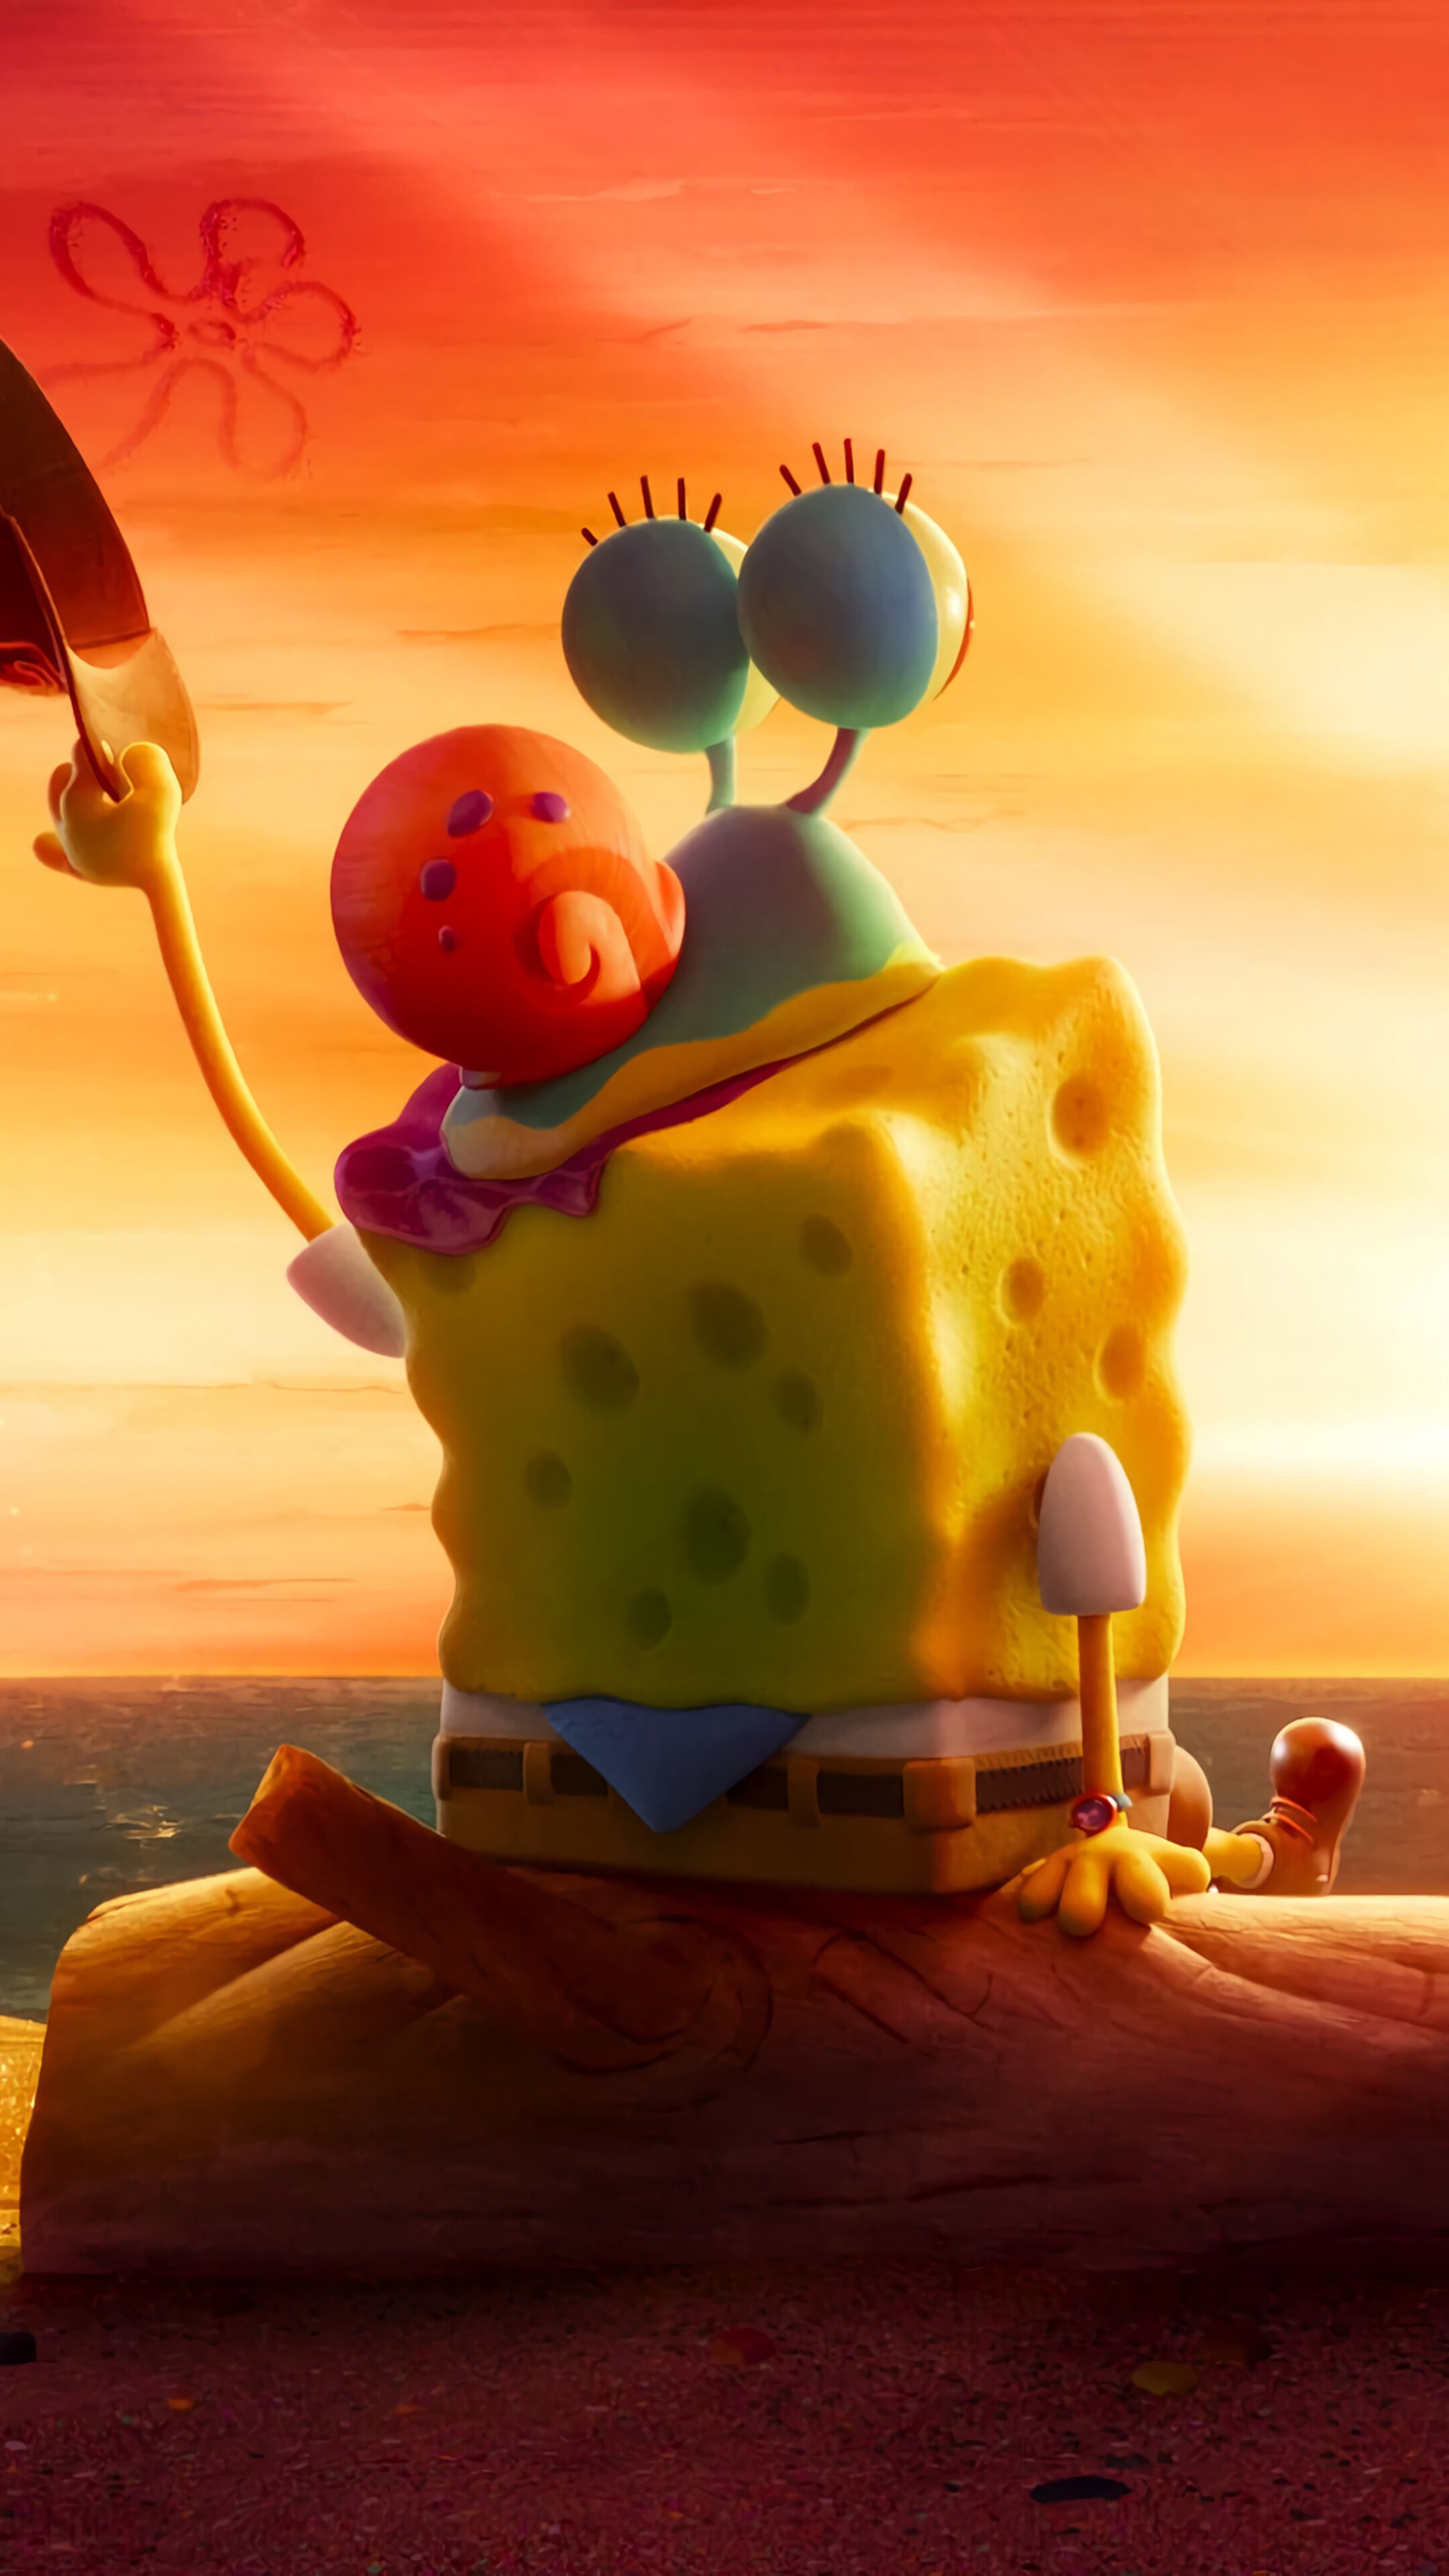 325454 The SpongeBob Movie Sponge on the Run, Poster, 4K phone HD Wallpapers, Image, Backgrounds, Photos and Pictures